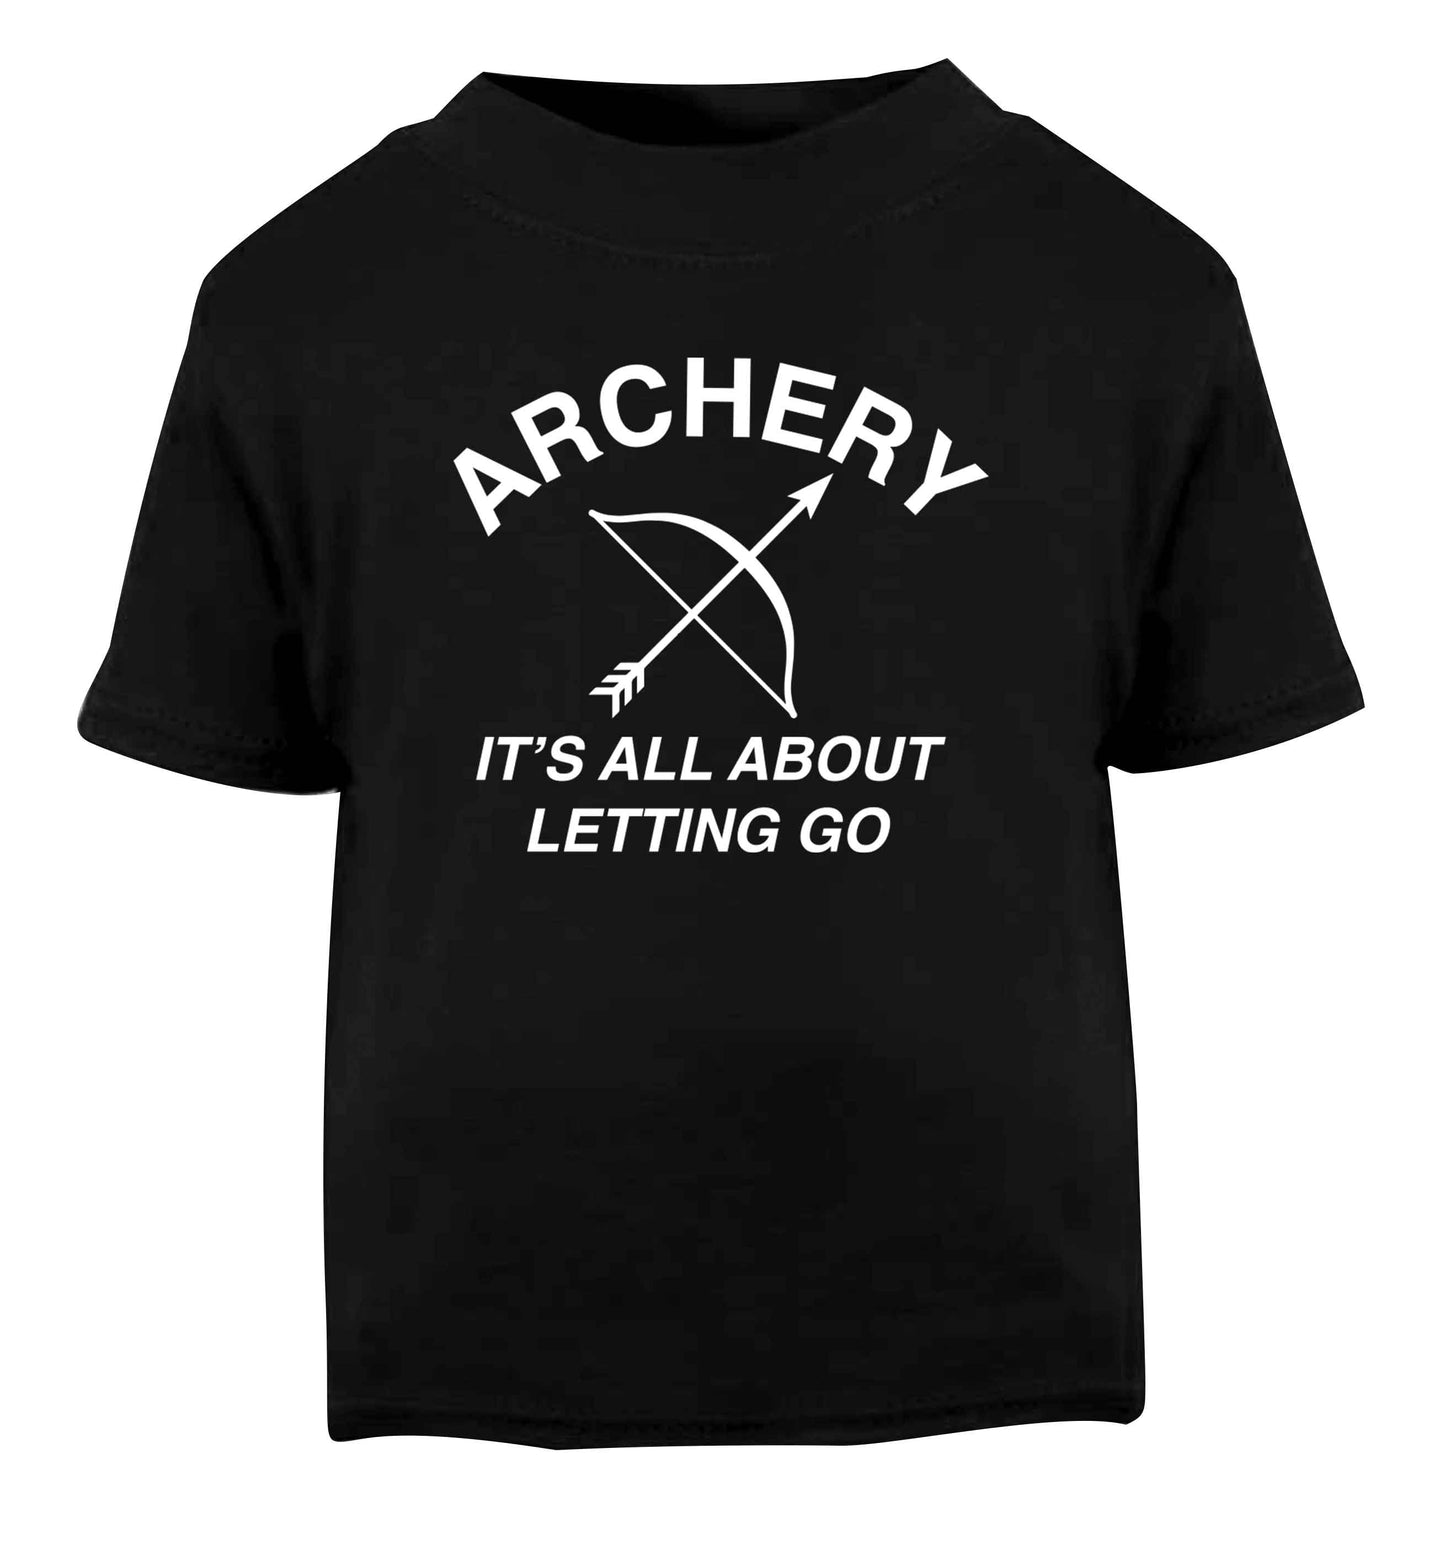 Archery it's all about letting go Black Baby Toddler Tshirt 2 years